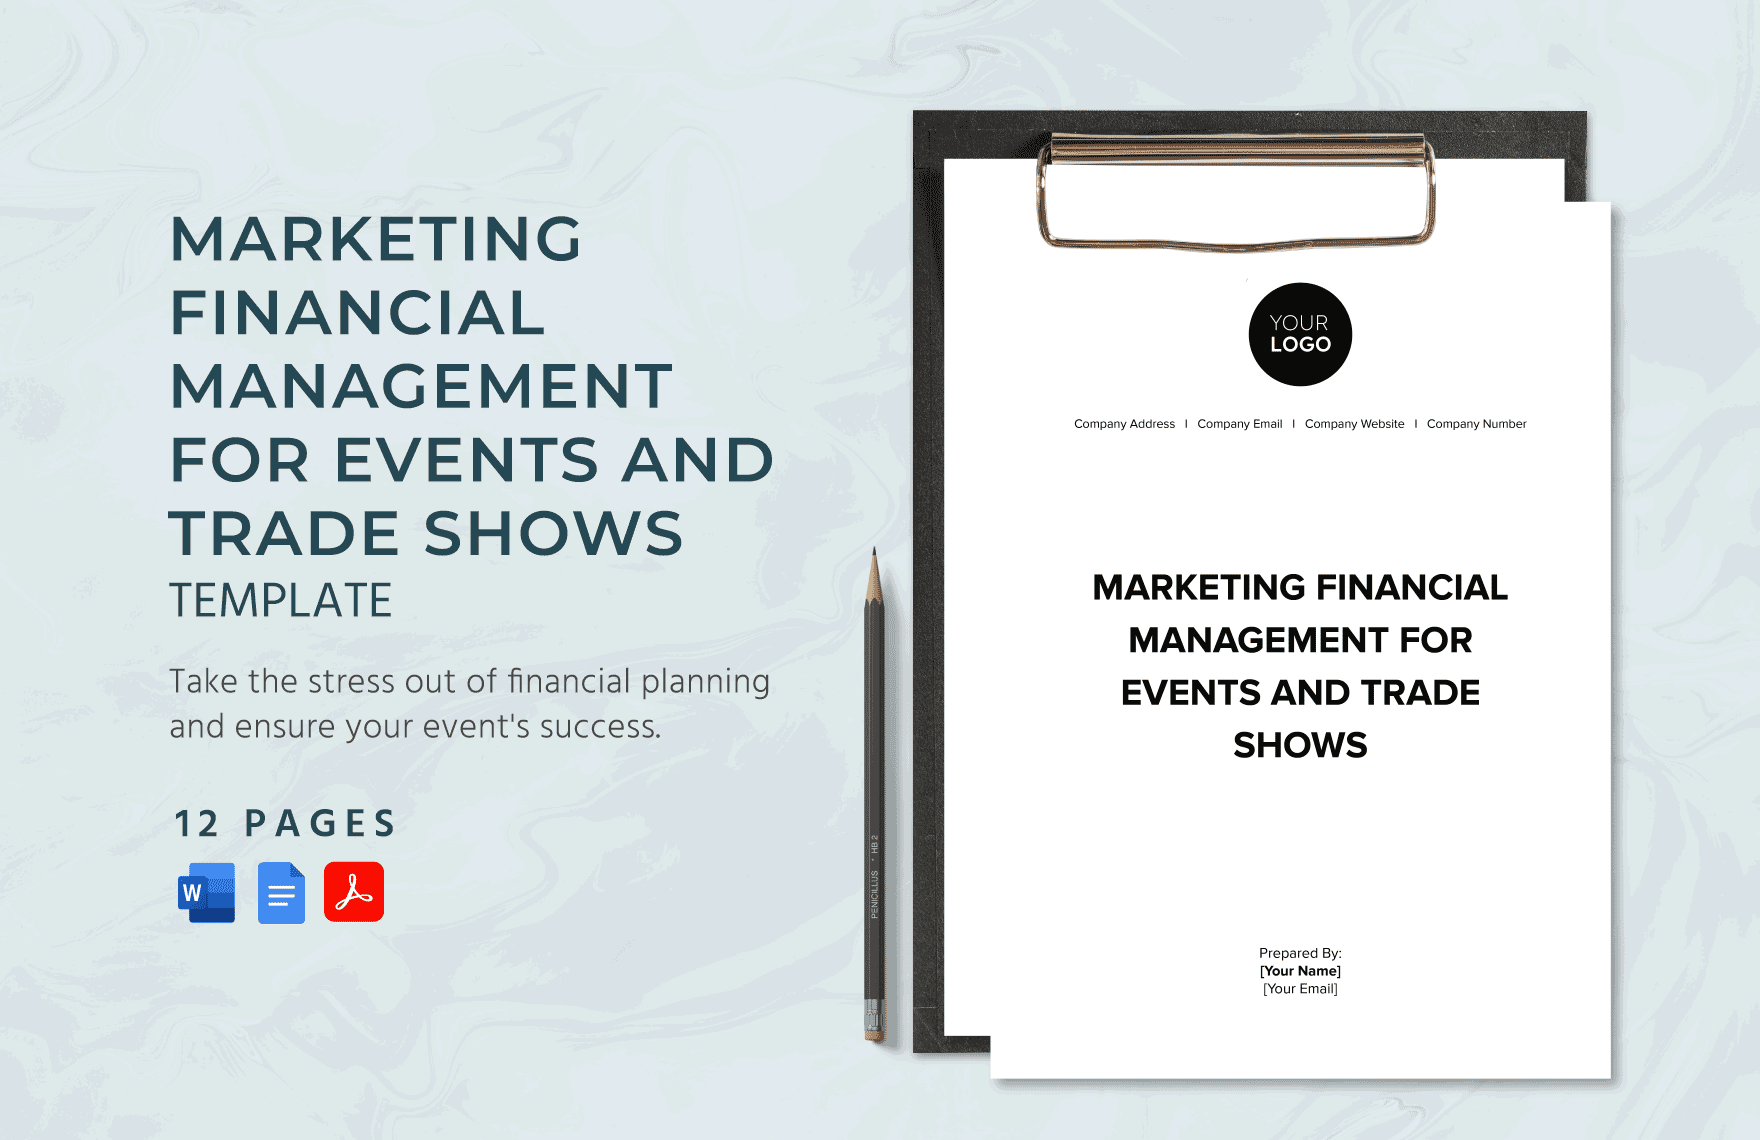 Marketing Financial Management for Events and Trade Shows Template